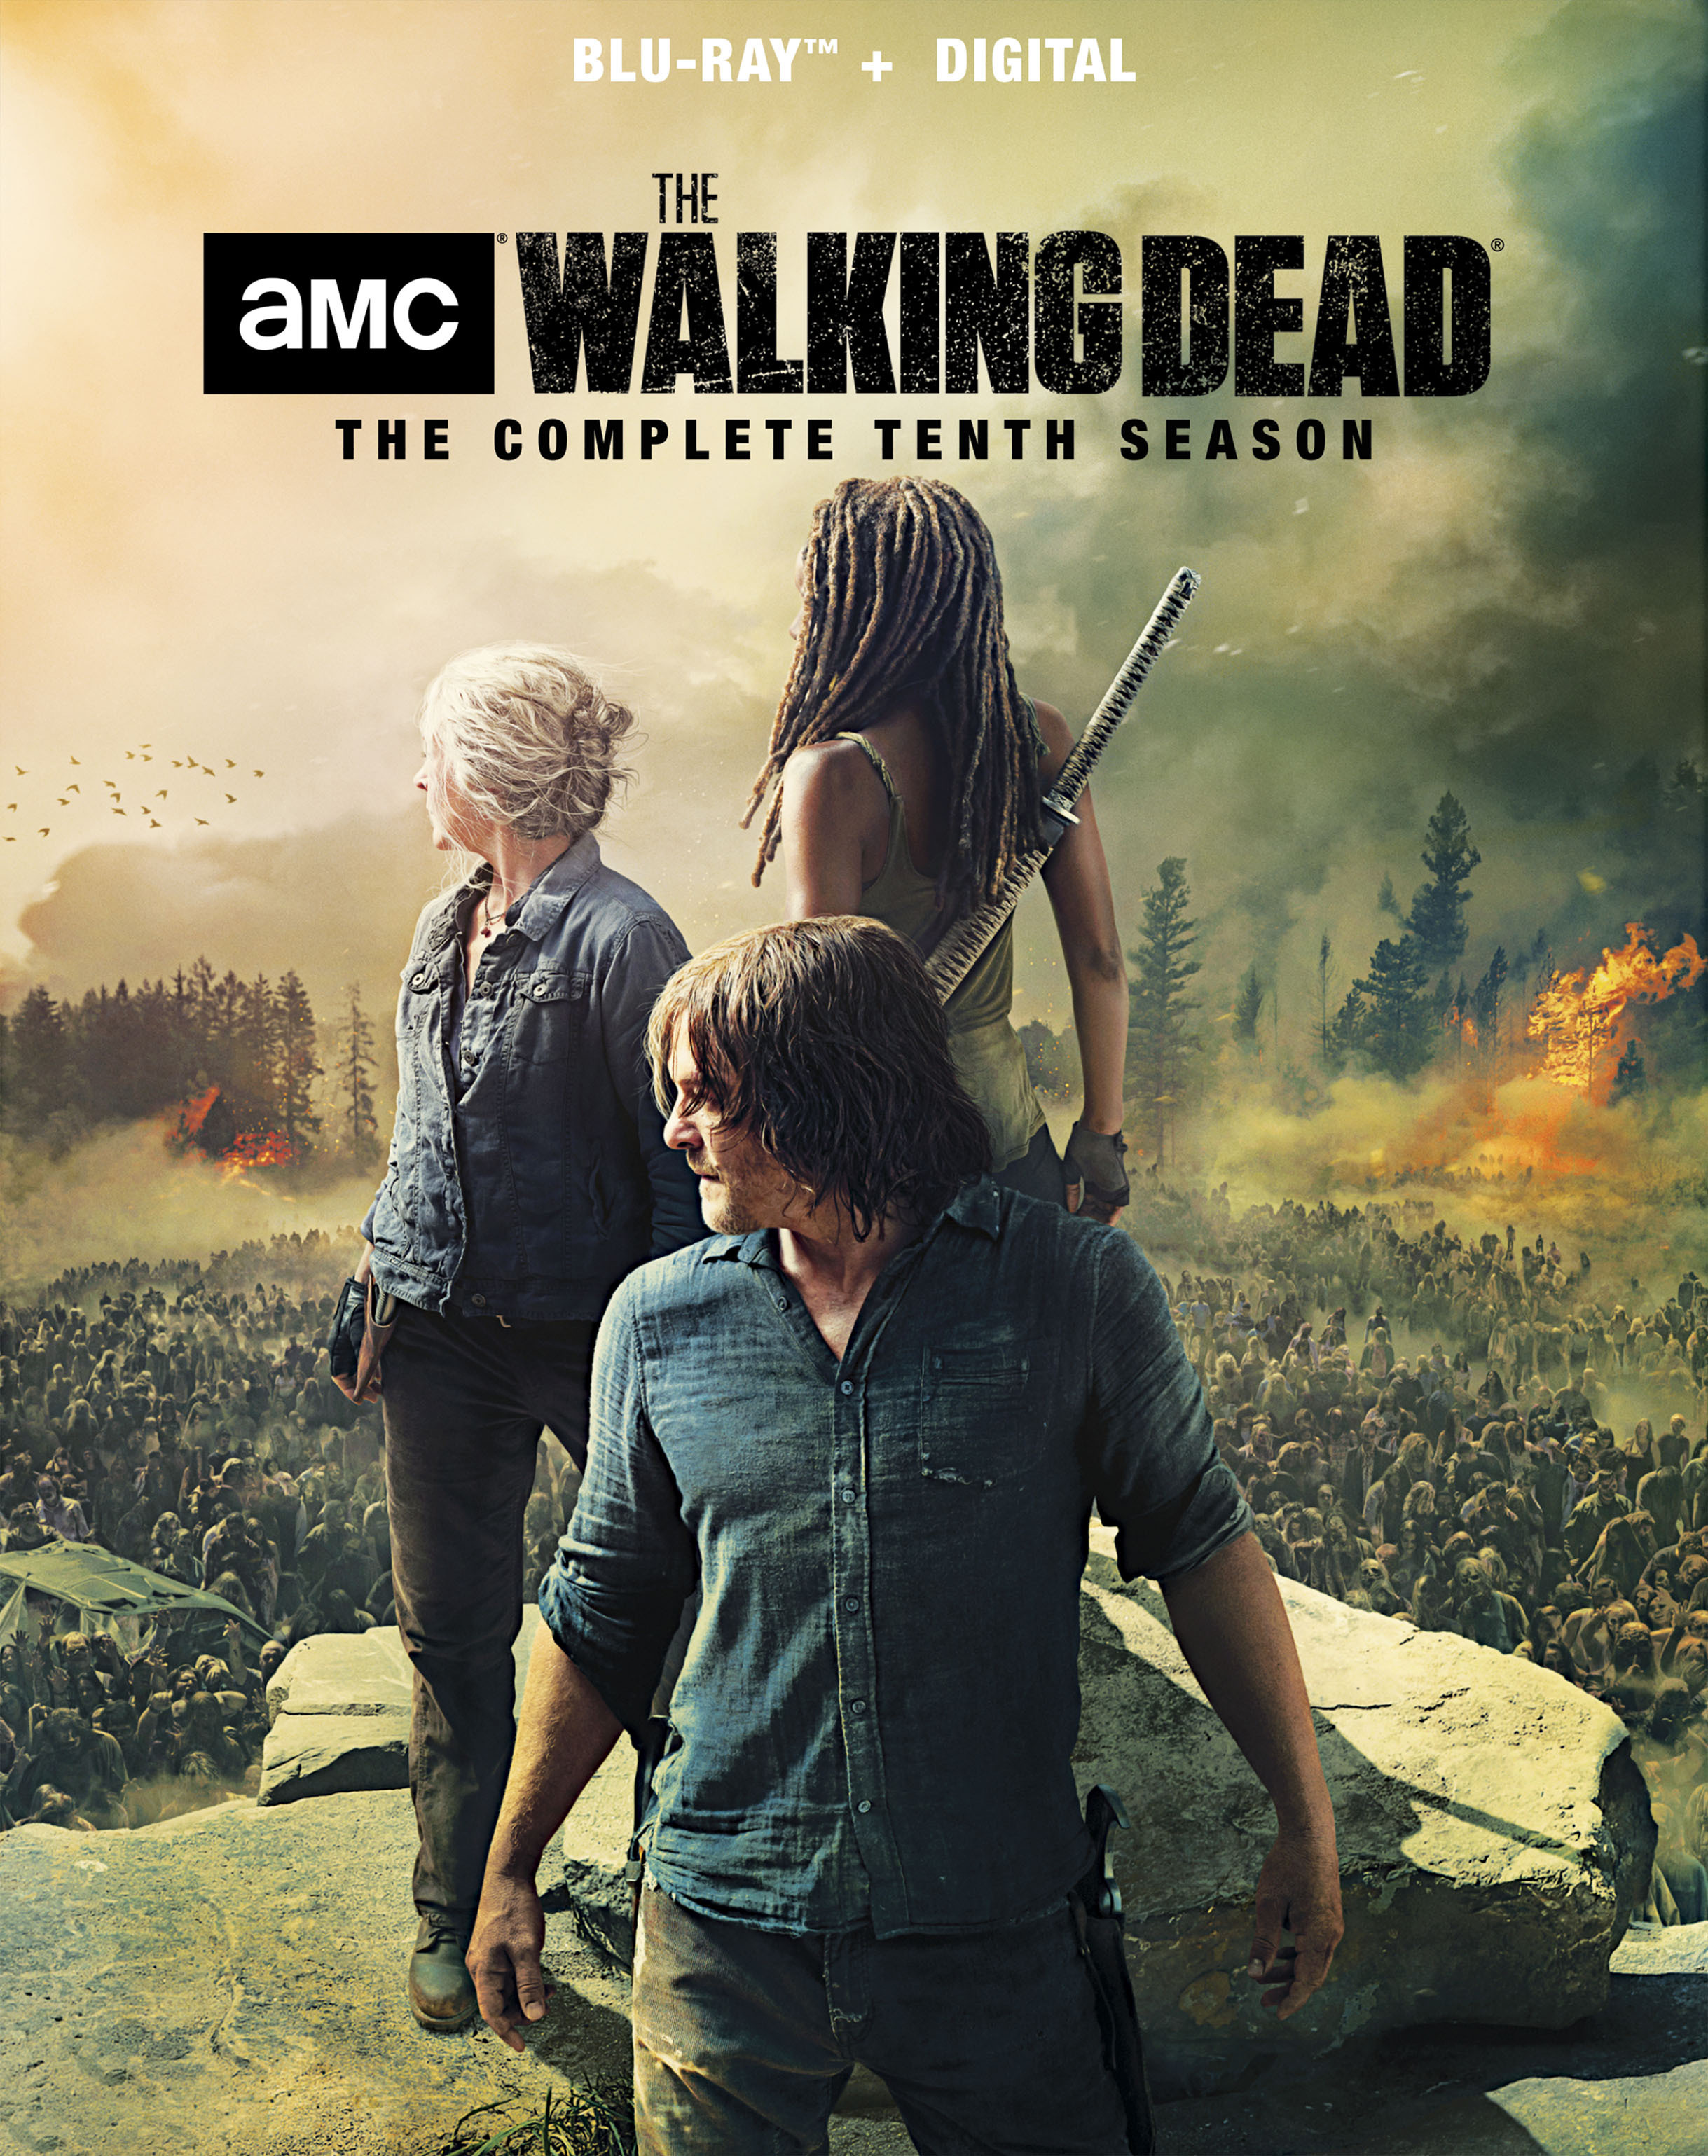 The Walking Dead: The Complete Tenth Season (Box Set) - Blu-ray [ 2021 ]  - Drama Television On Blu-ray - TV Shows On GRUV